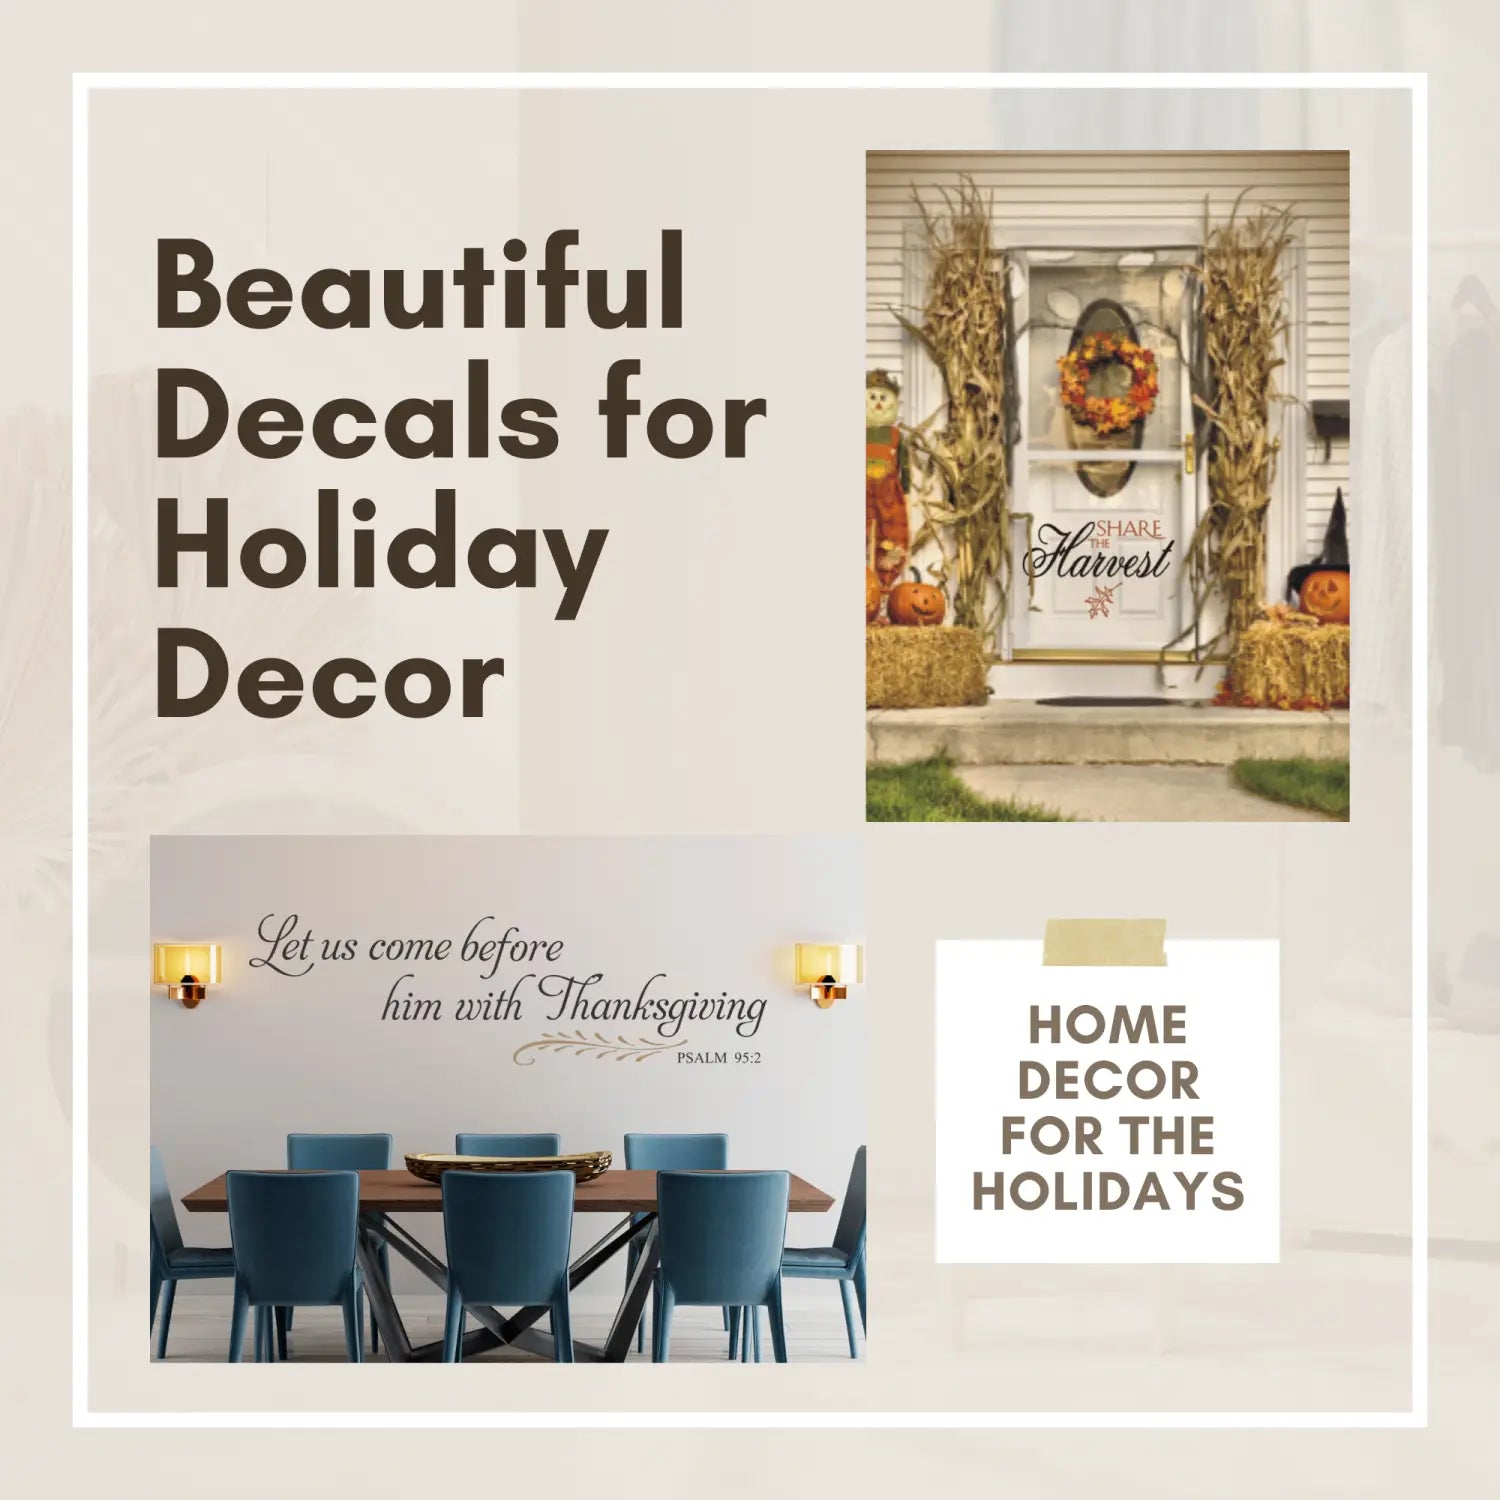 Custom Wall Quotes & Decals for the Holiday Season: Add Festive Spirit to Your Home or Business